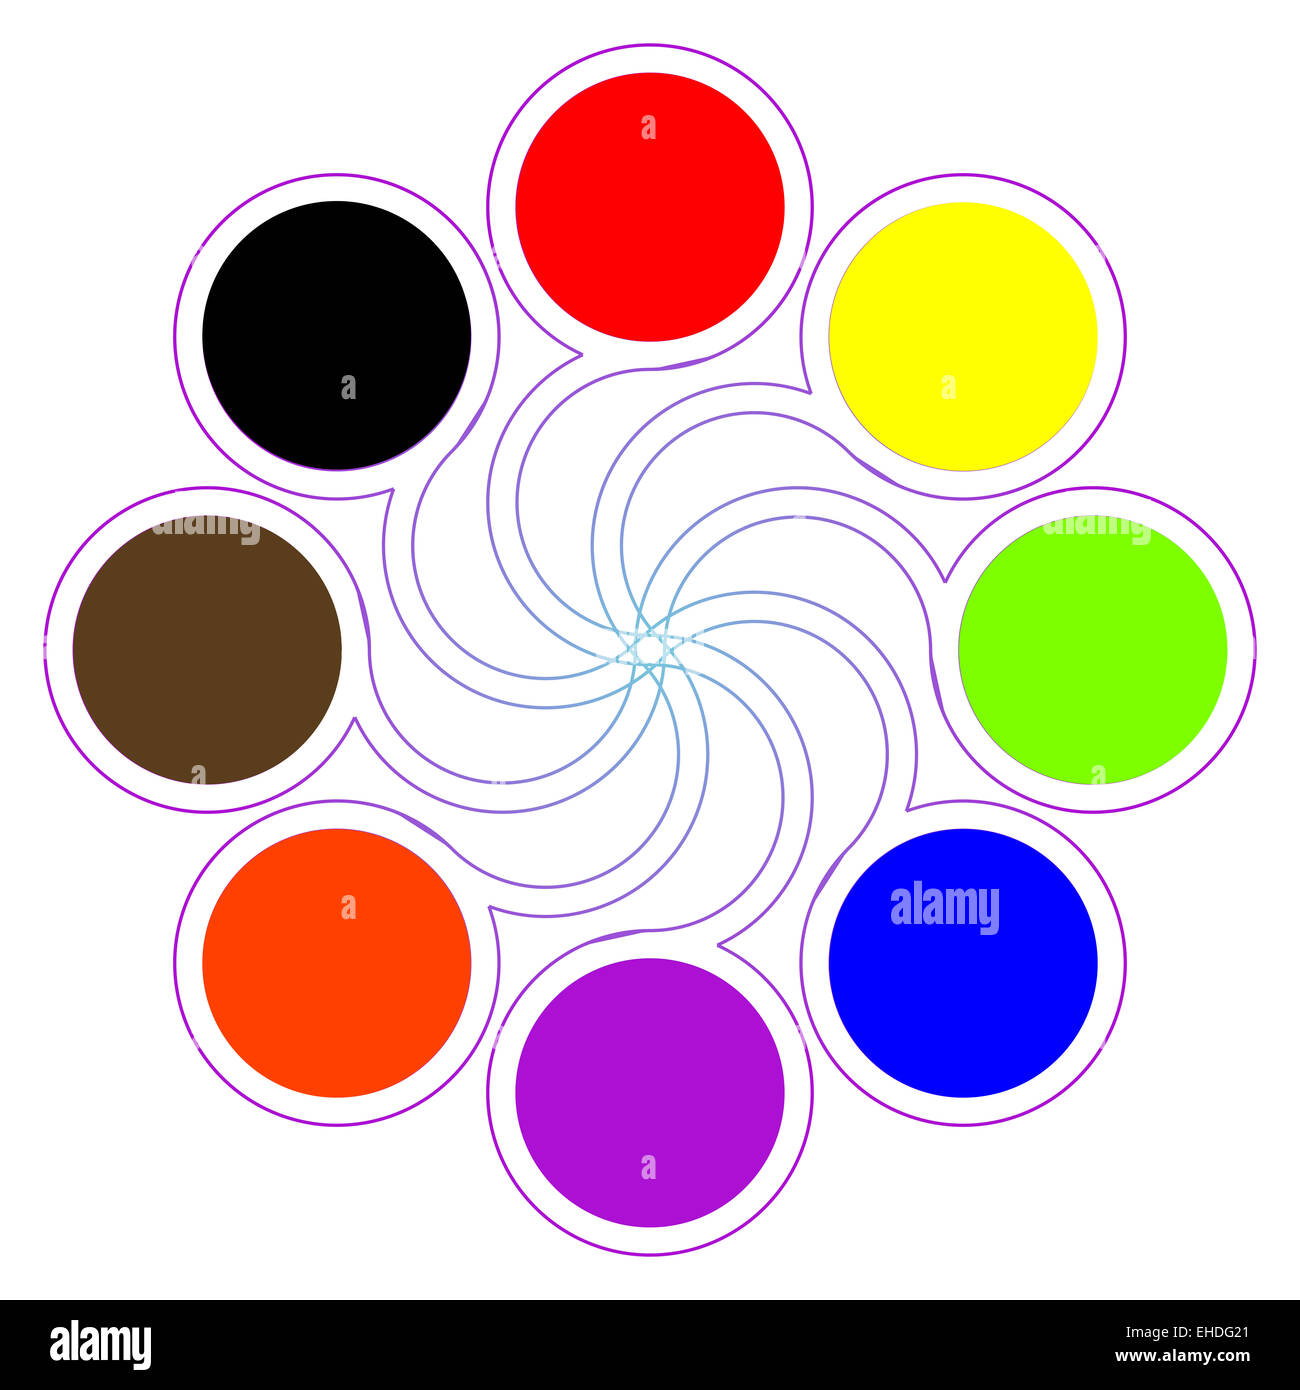 https://c8.alamy.com/comp/EHDG21/round-color-palette-with-eight-basic-colors-EHDG21.jpg